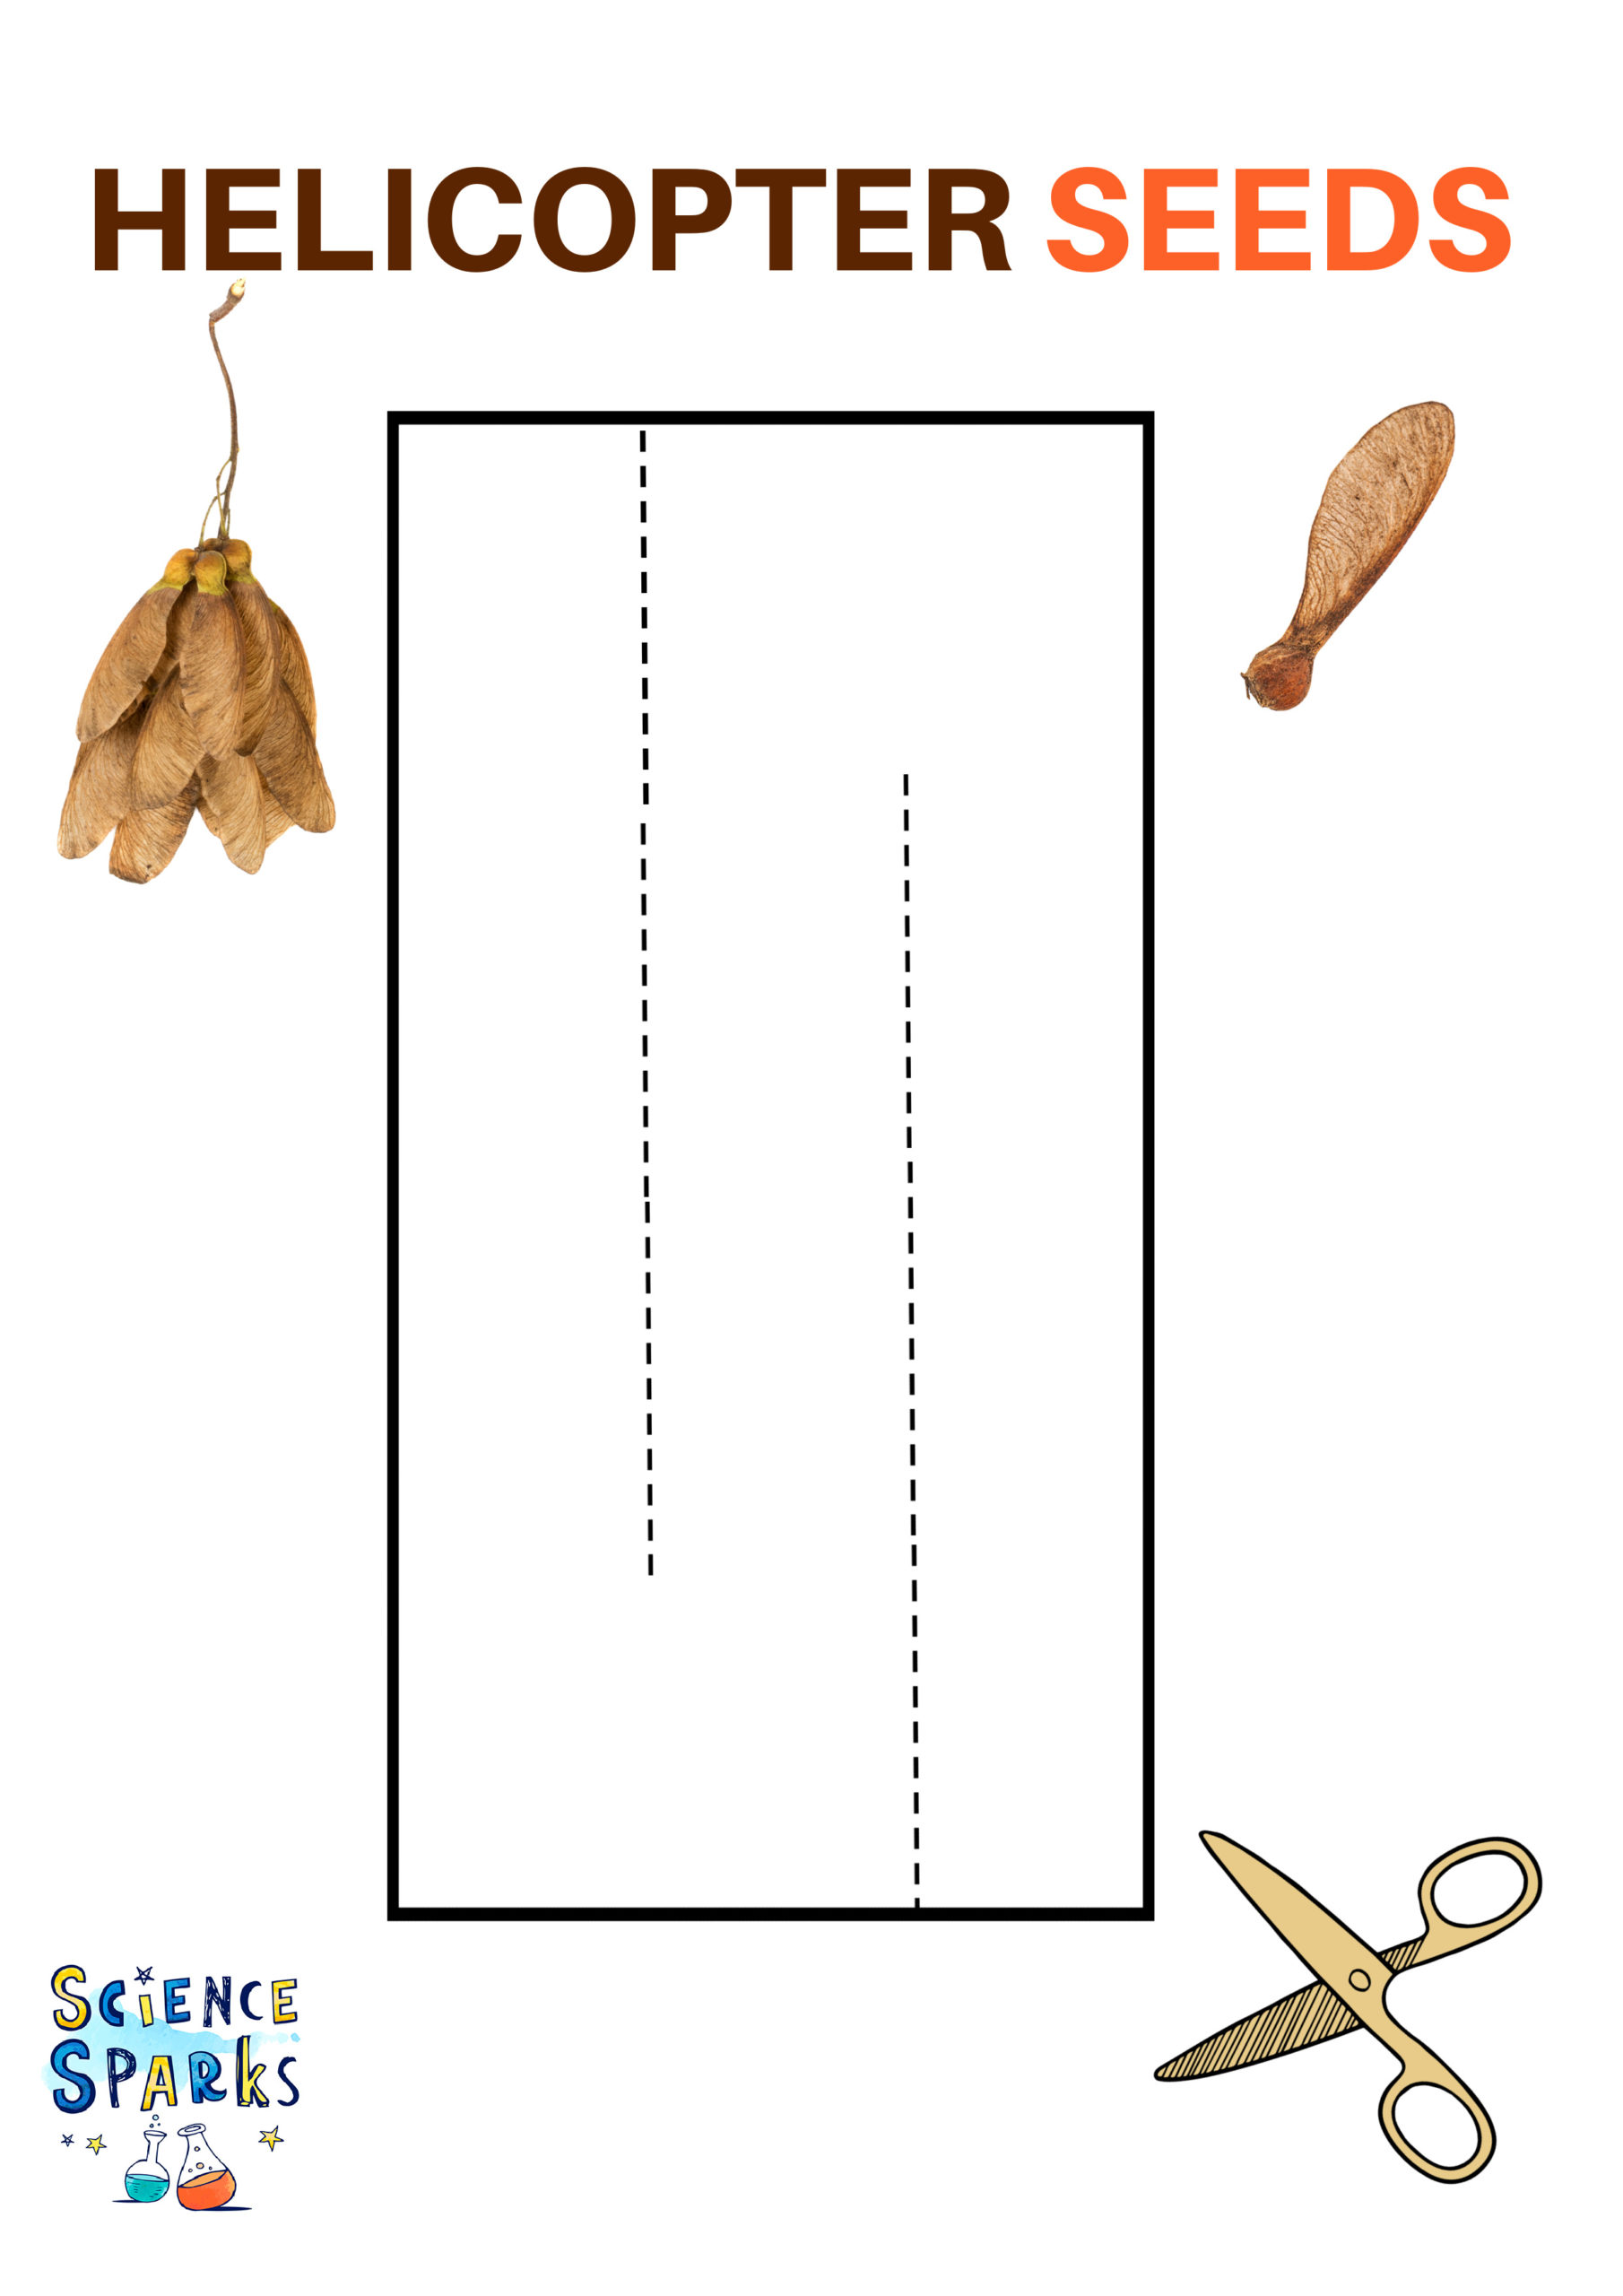 Template for a paper spinner to demonstrate seed dispersal